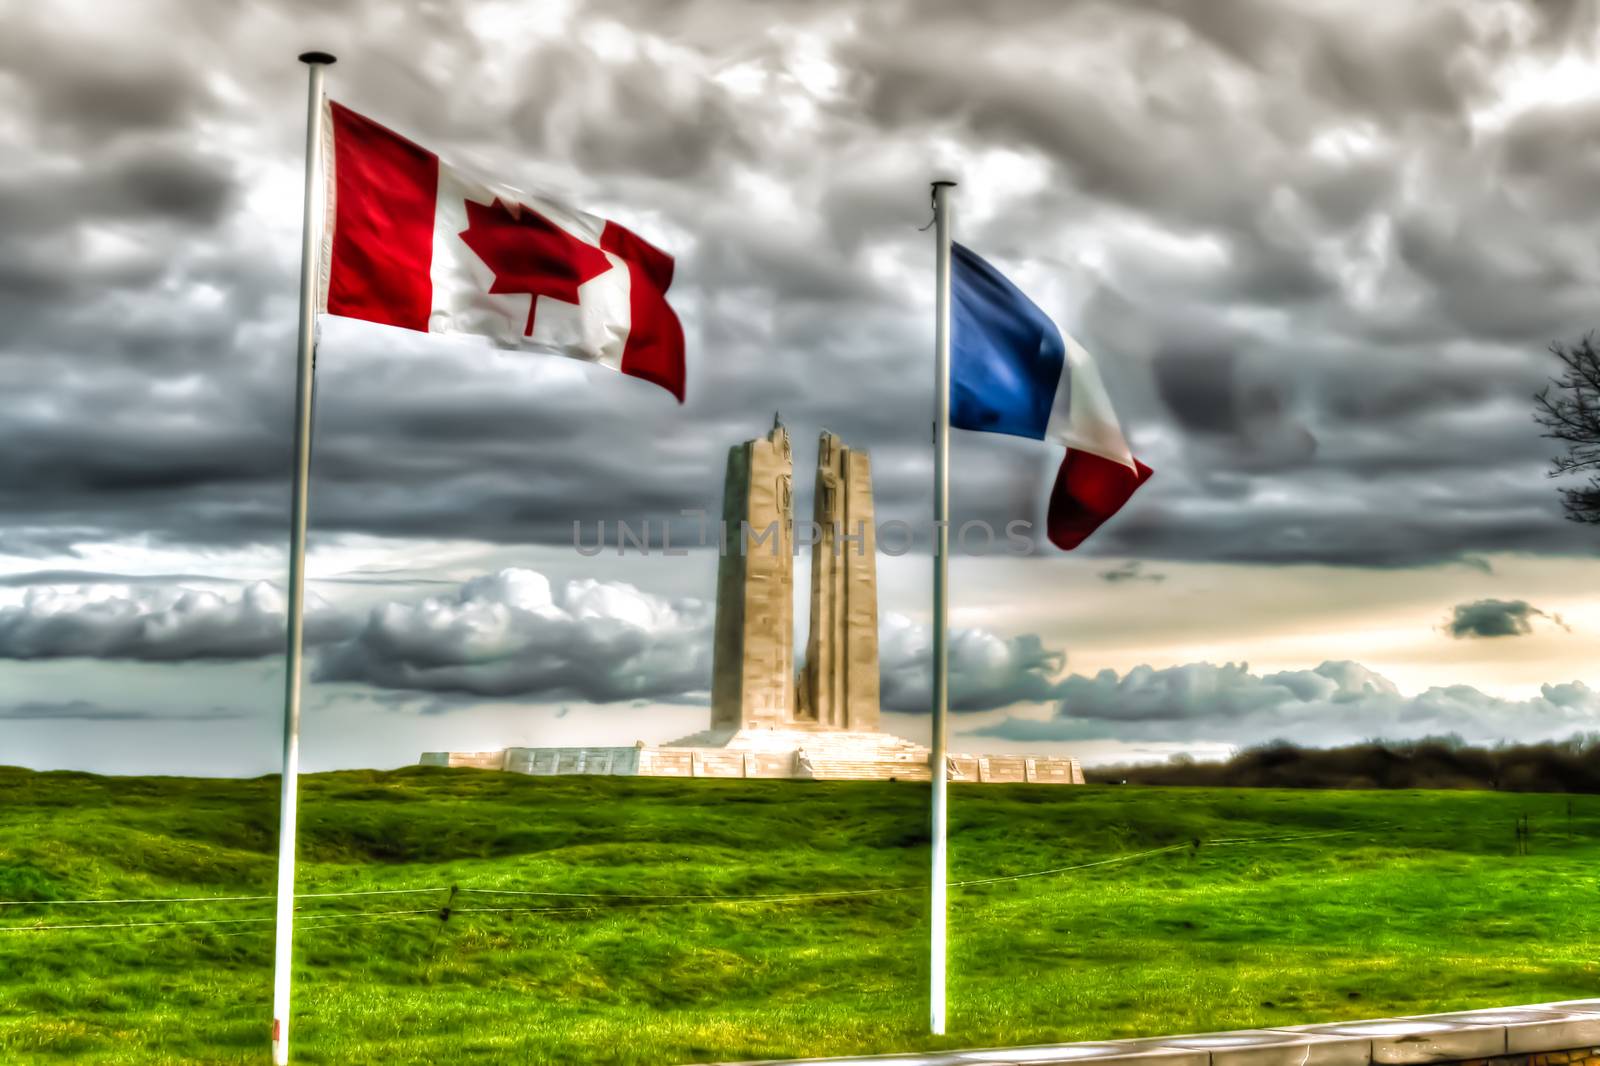 The Canadian National Vimy Ridge Memorial in France by Havana